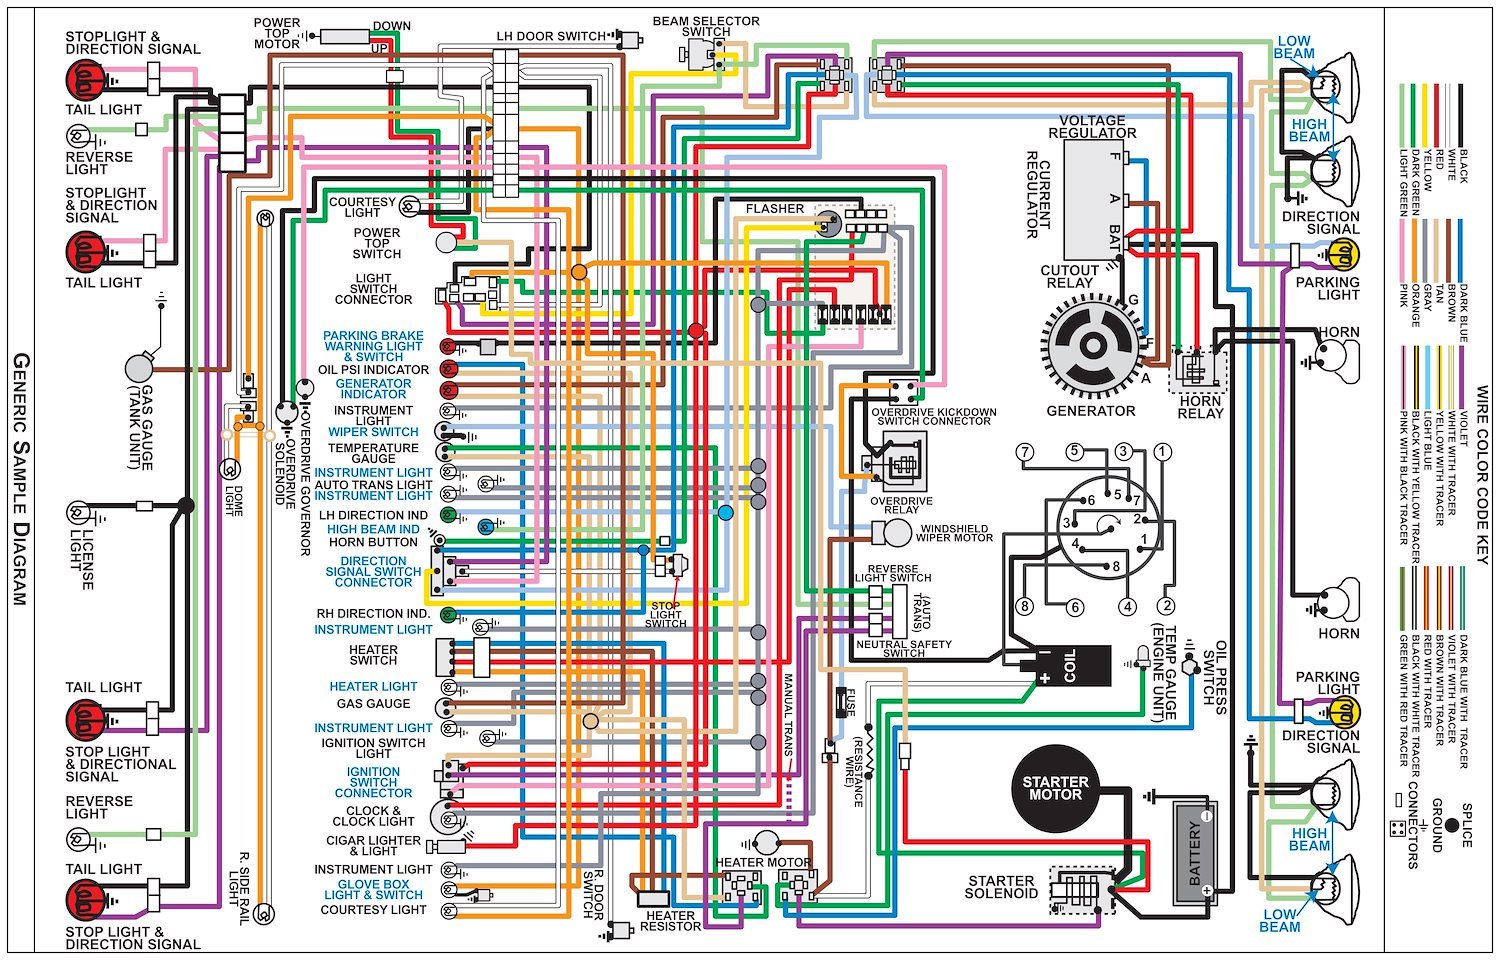 Wiring Diagram for 1964 AMC Rambler Classic, 11 in x 17 in., Laminated